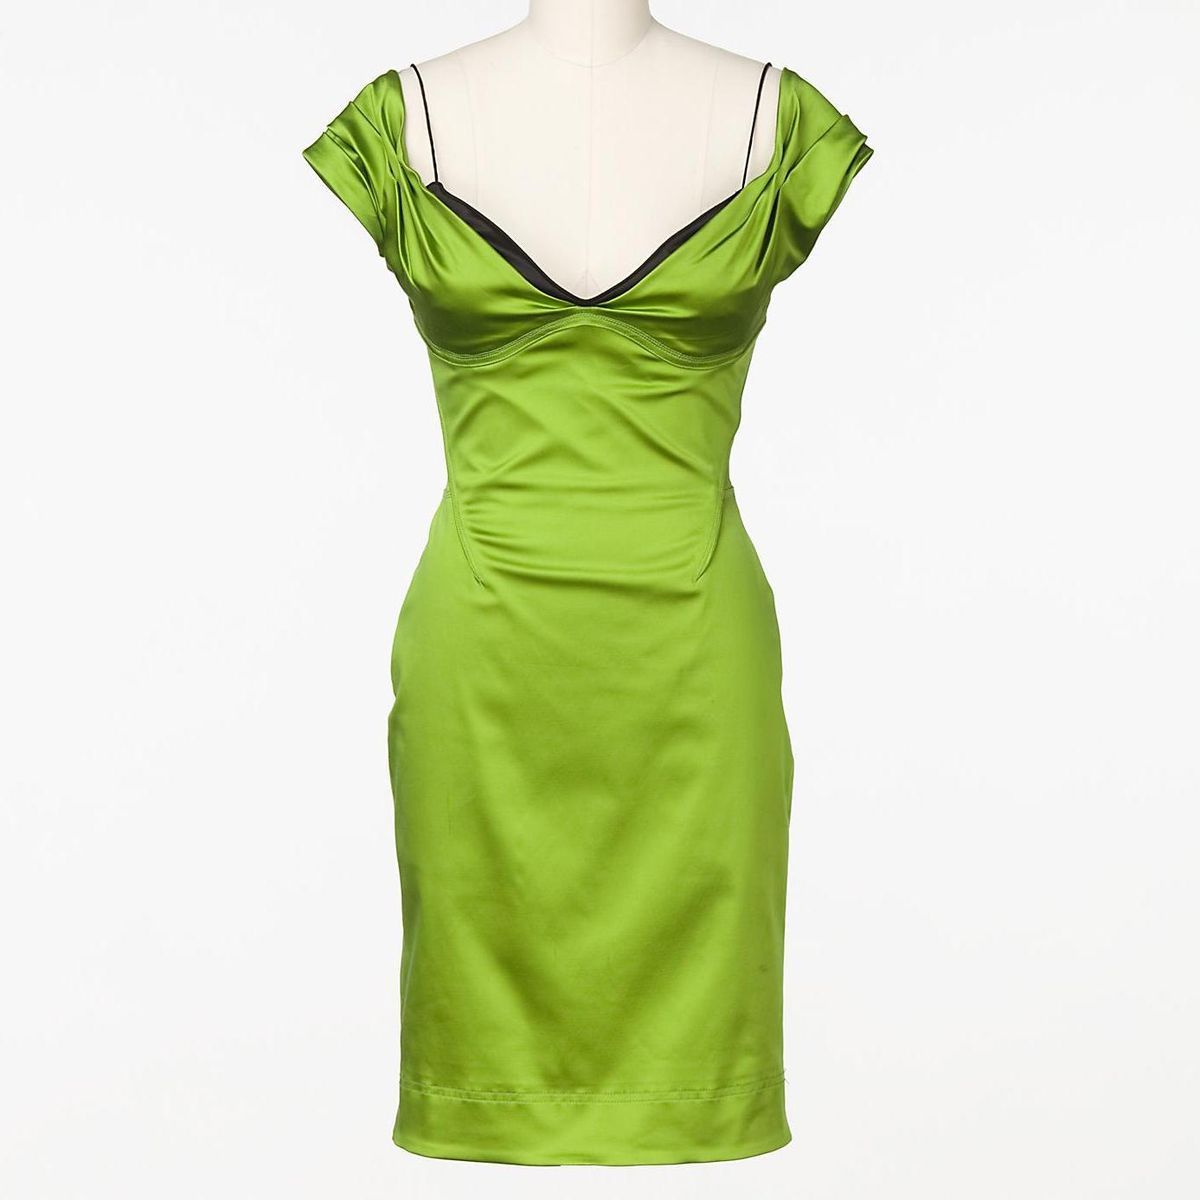 Amber Rose Zac Posen Green Off The Shoulder Fitted Dress Size 4